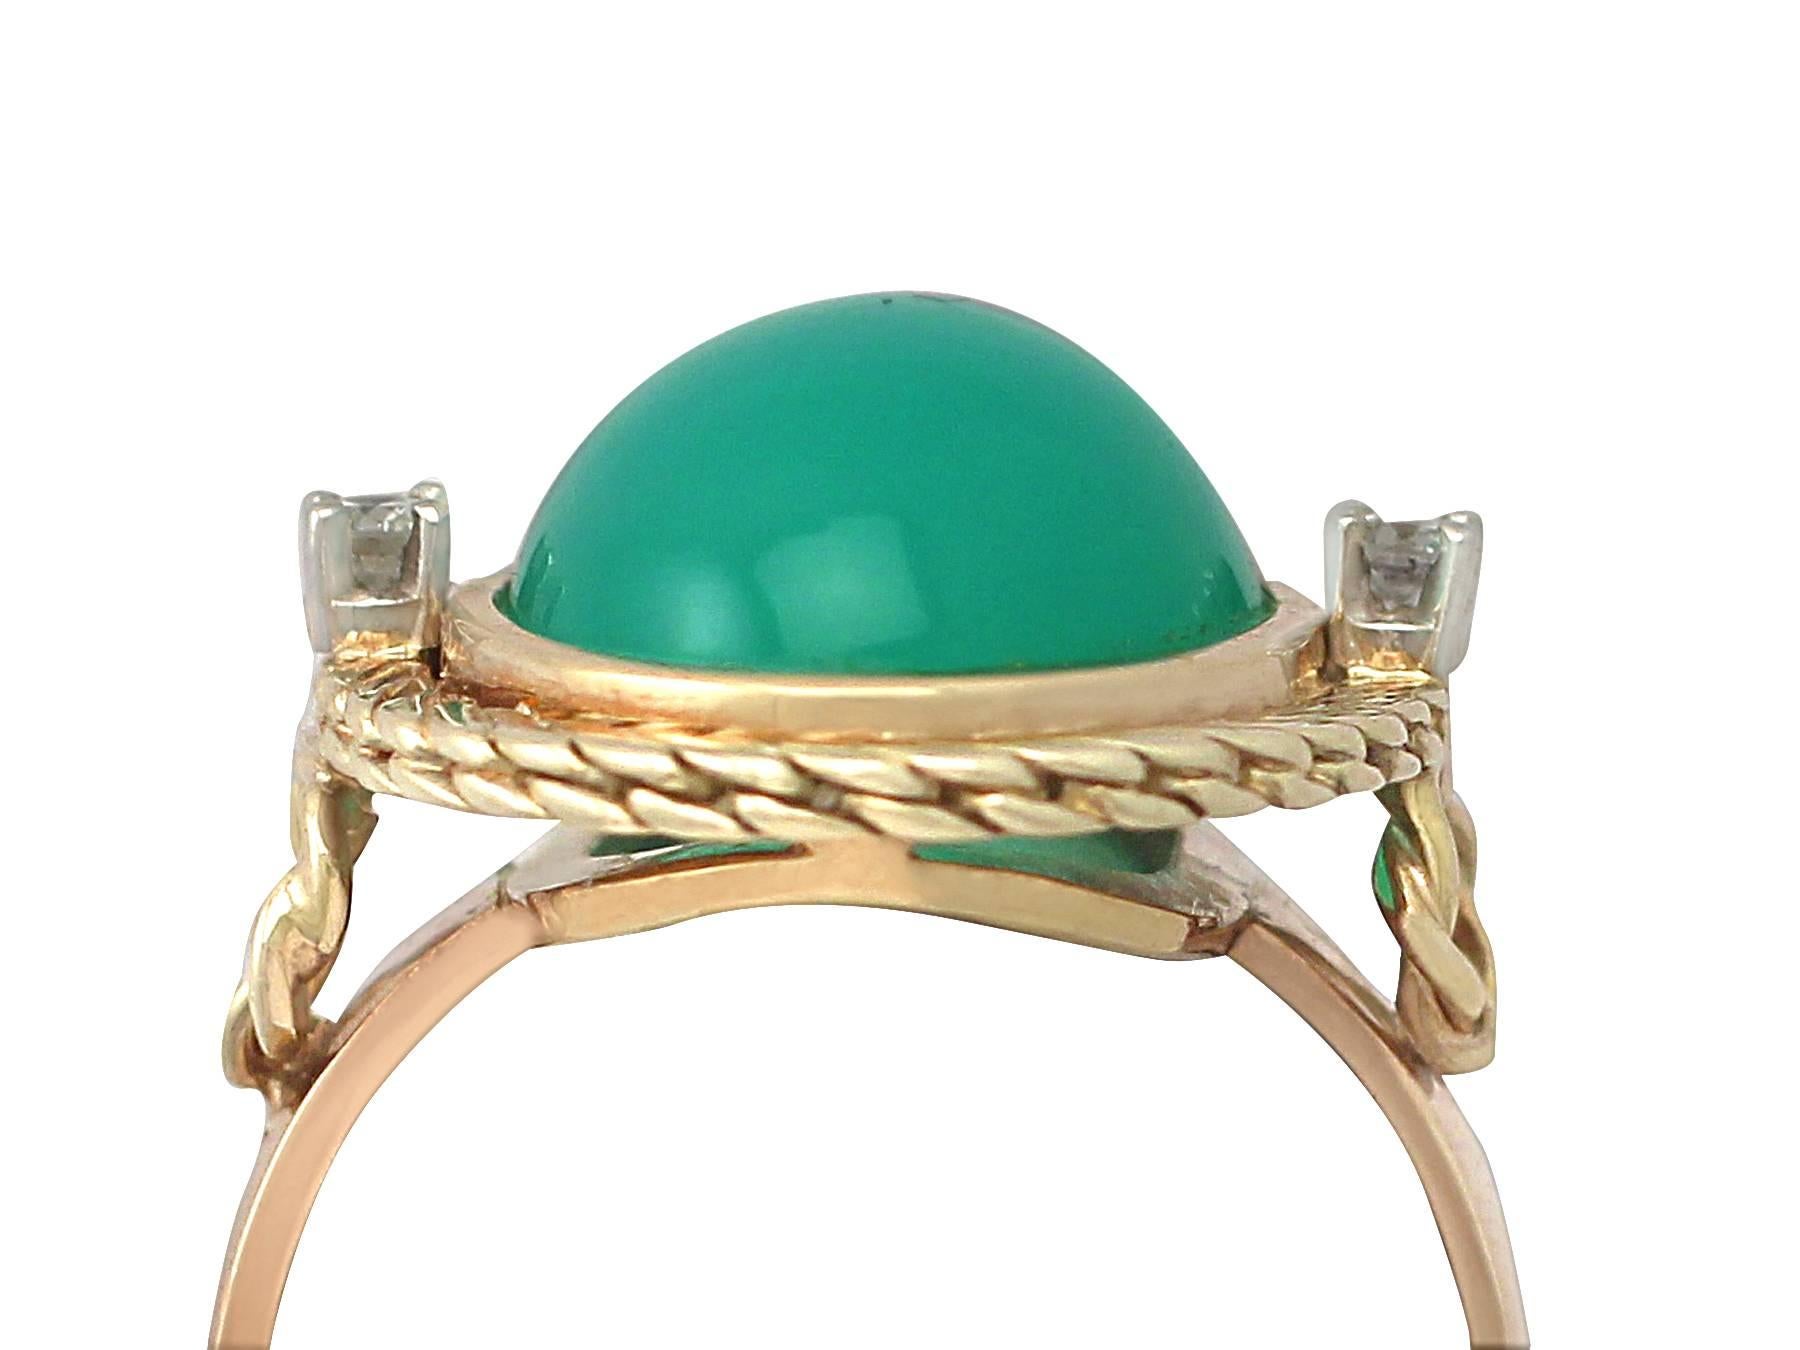 A fine and impressive vintage chrysoprase and 0.08 carat diamond, 14 karat yellow gold and 14 karat white gold set dress ring; part of our vintage jewellery and estate jewelry collections

This fine and impressive vintage chrysoprase ring has been